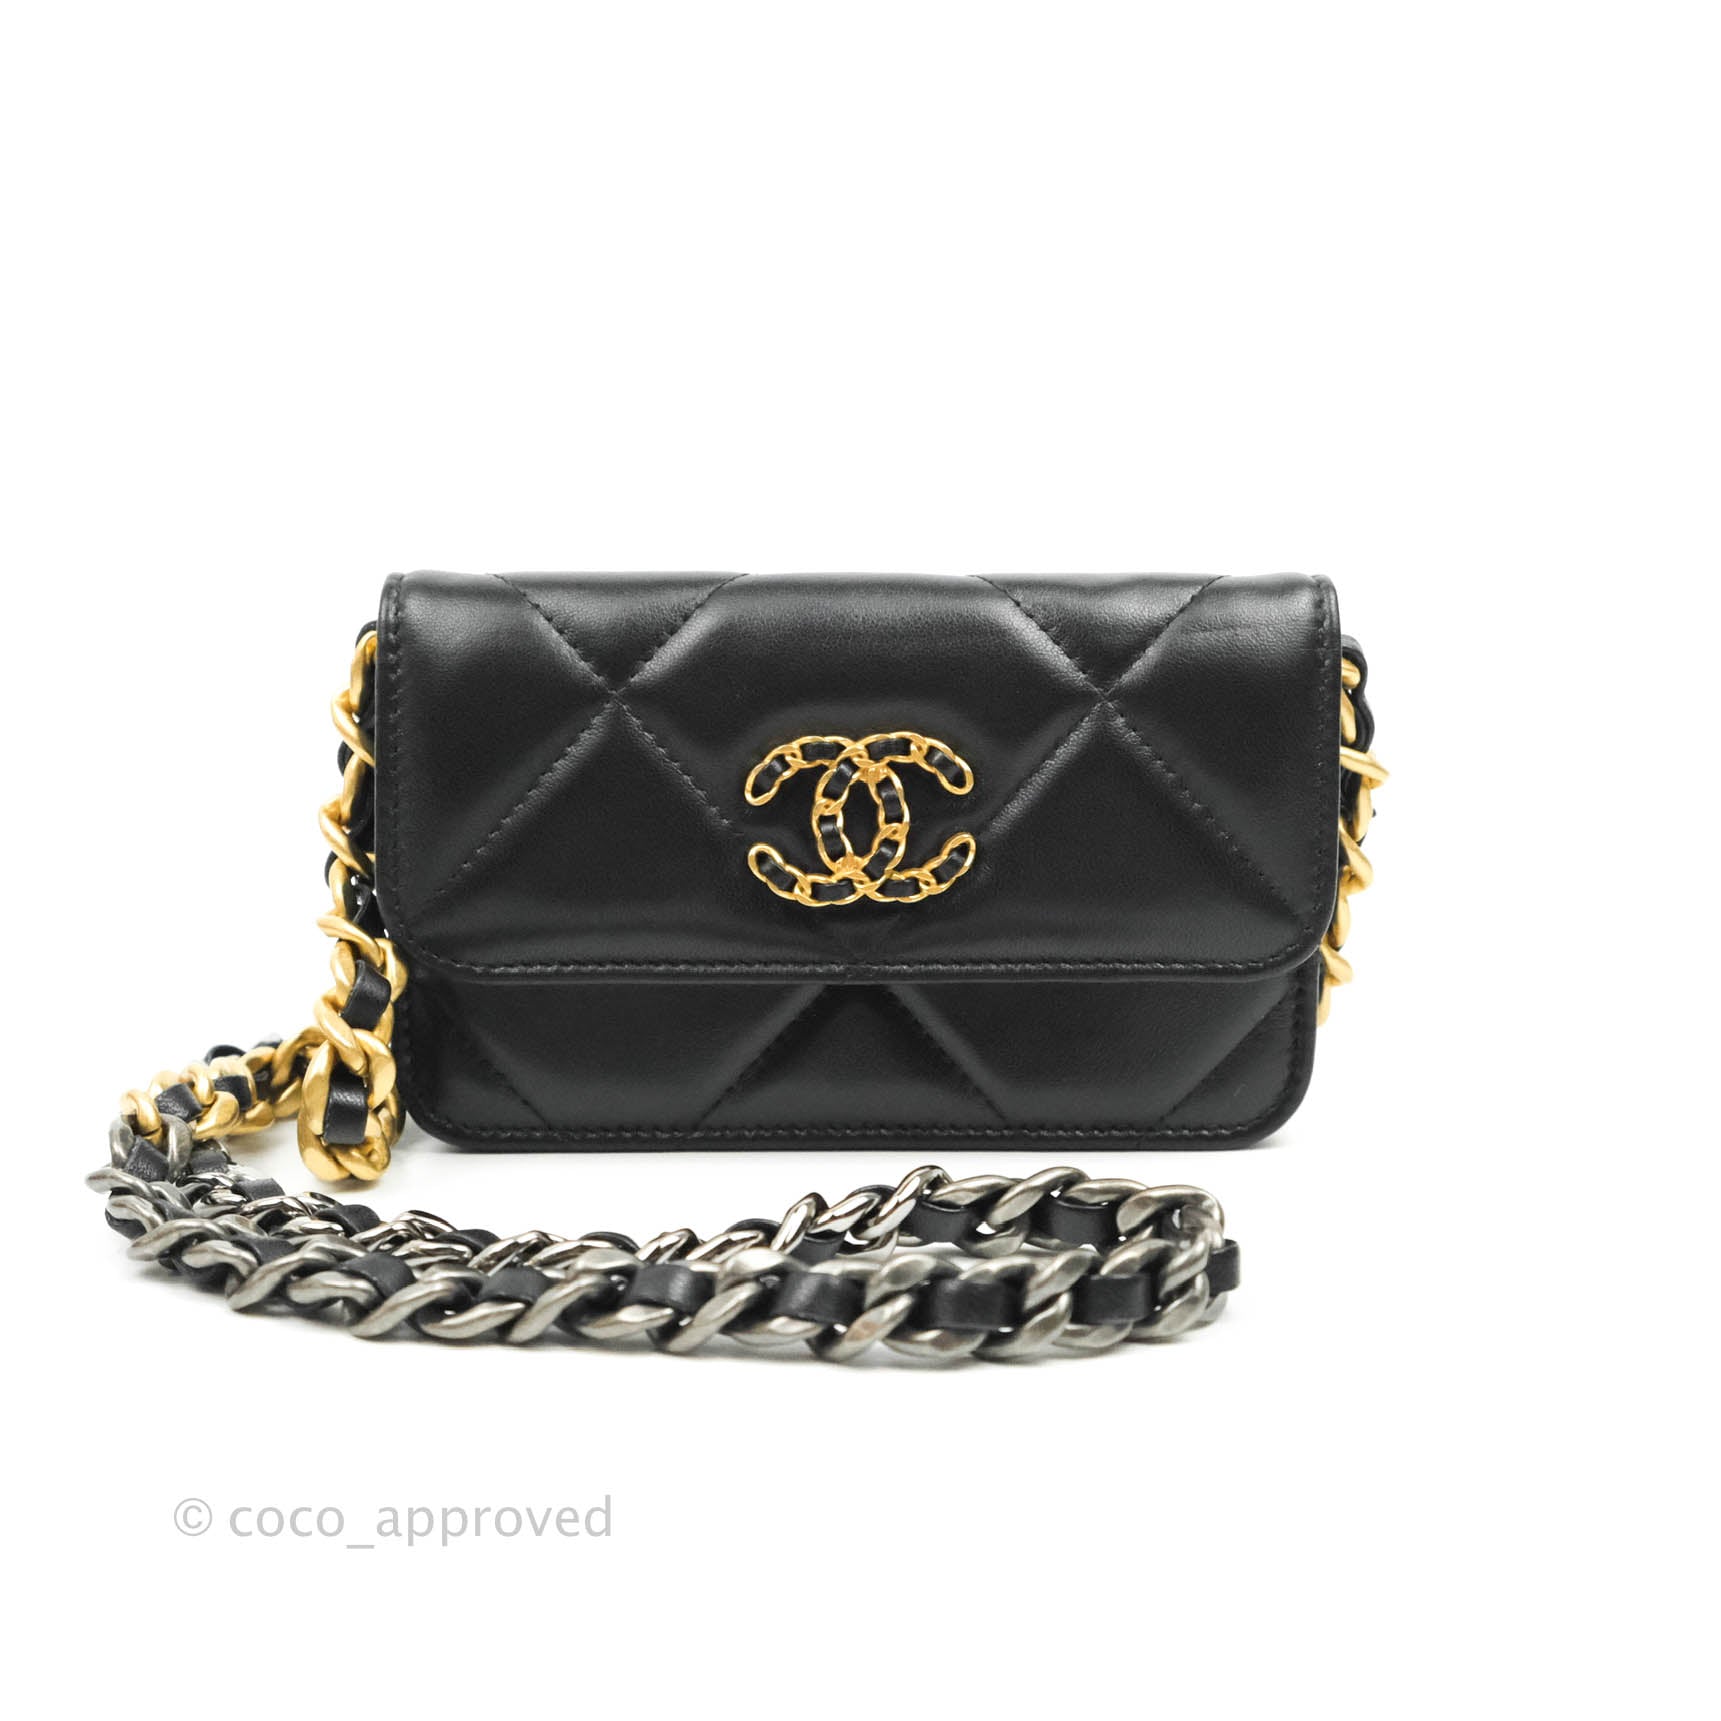 Chanel 19 leather clutch bag Chanel Black in Leather - 29694436